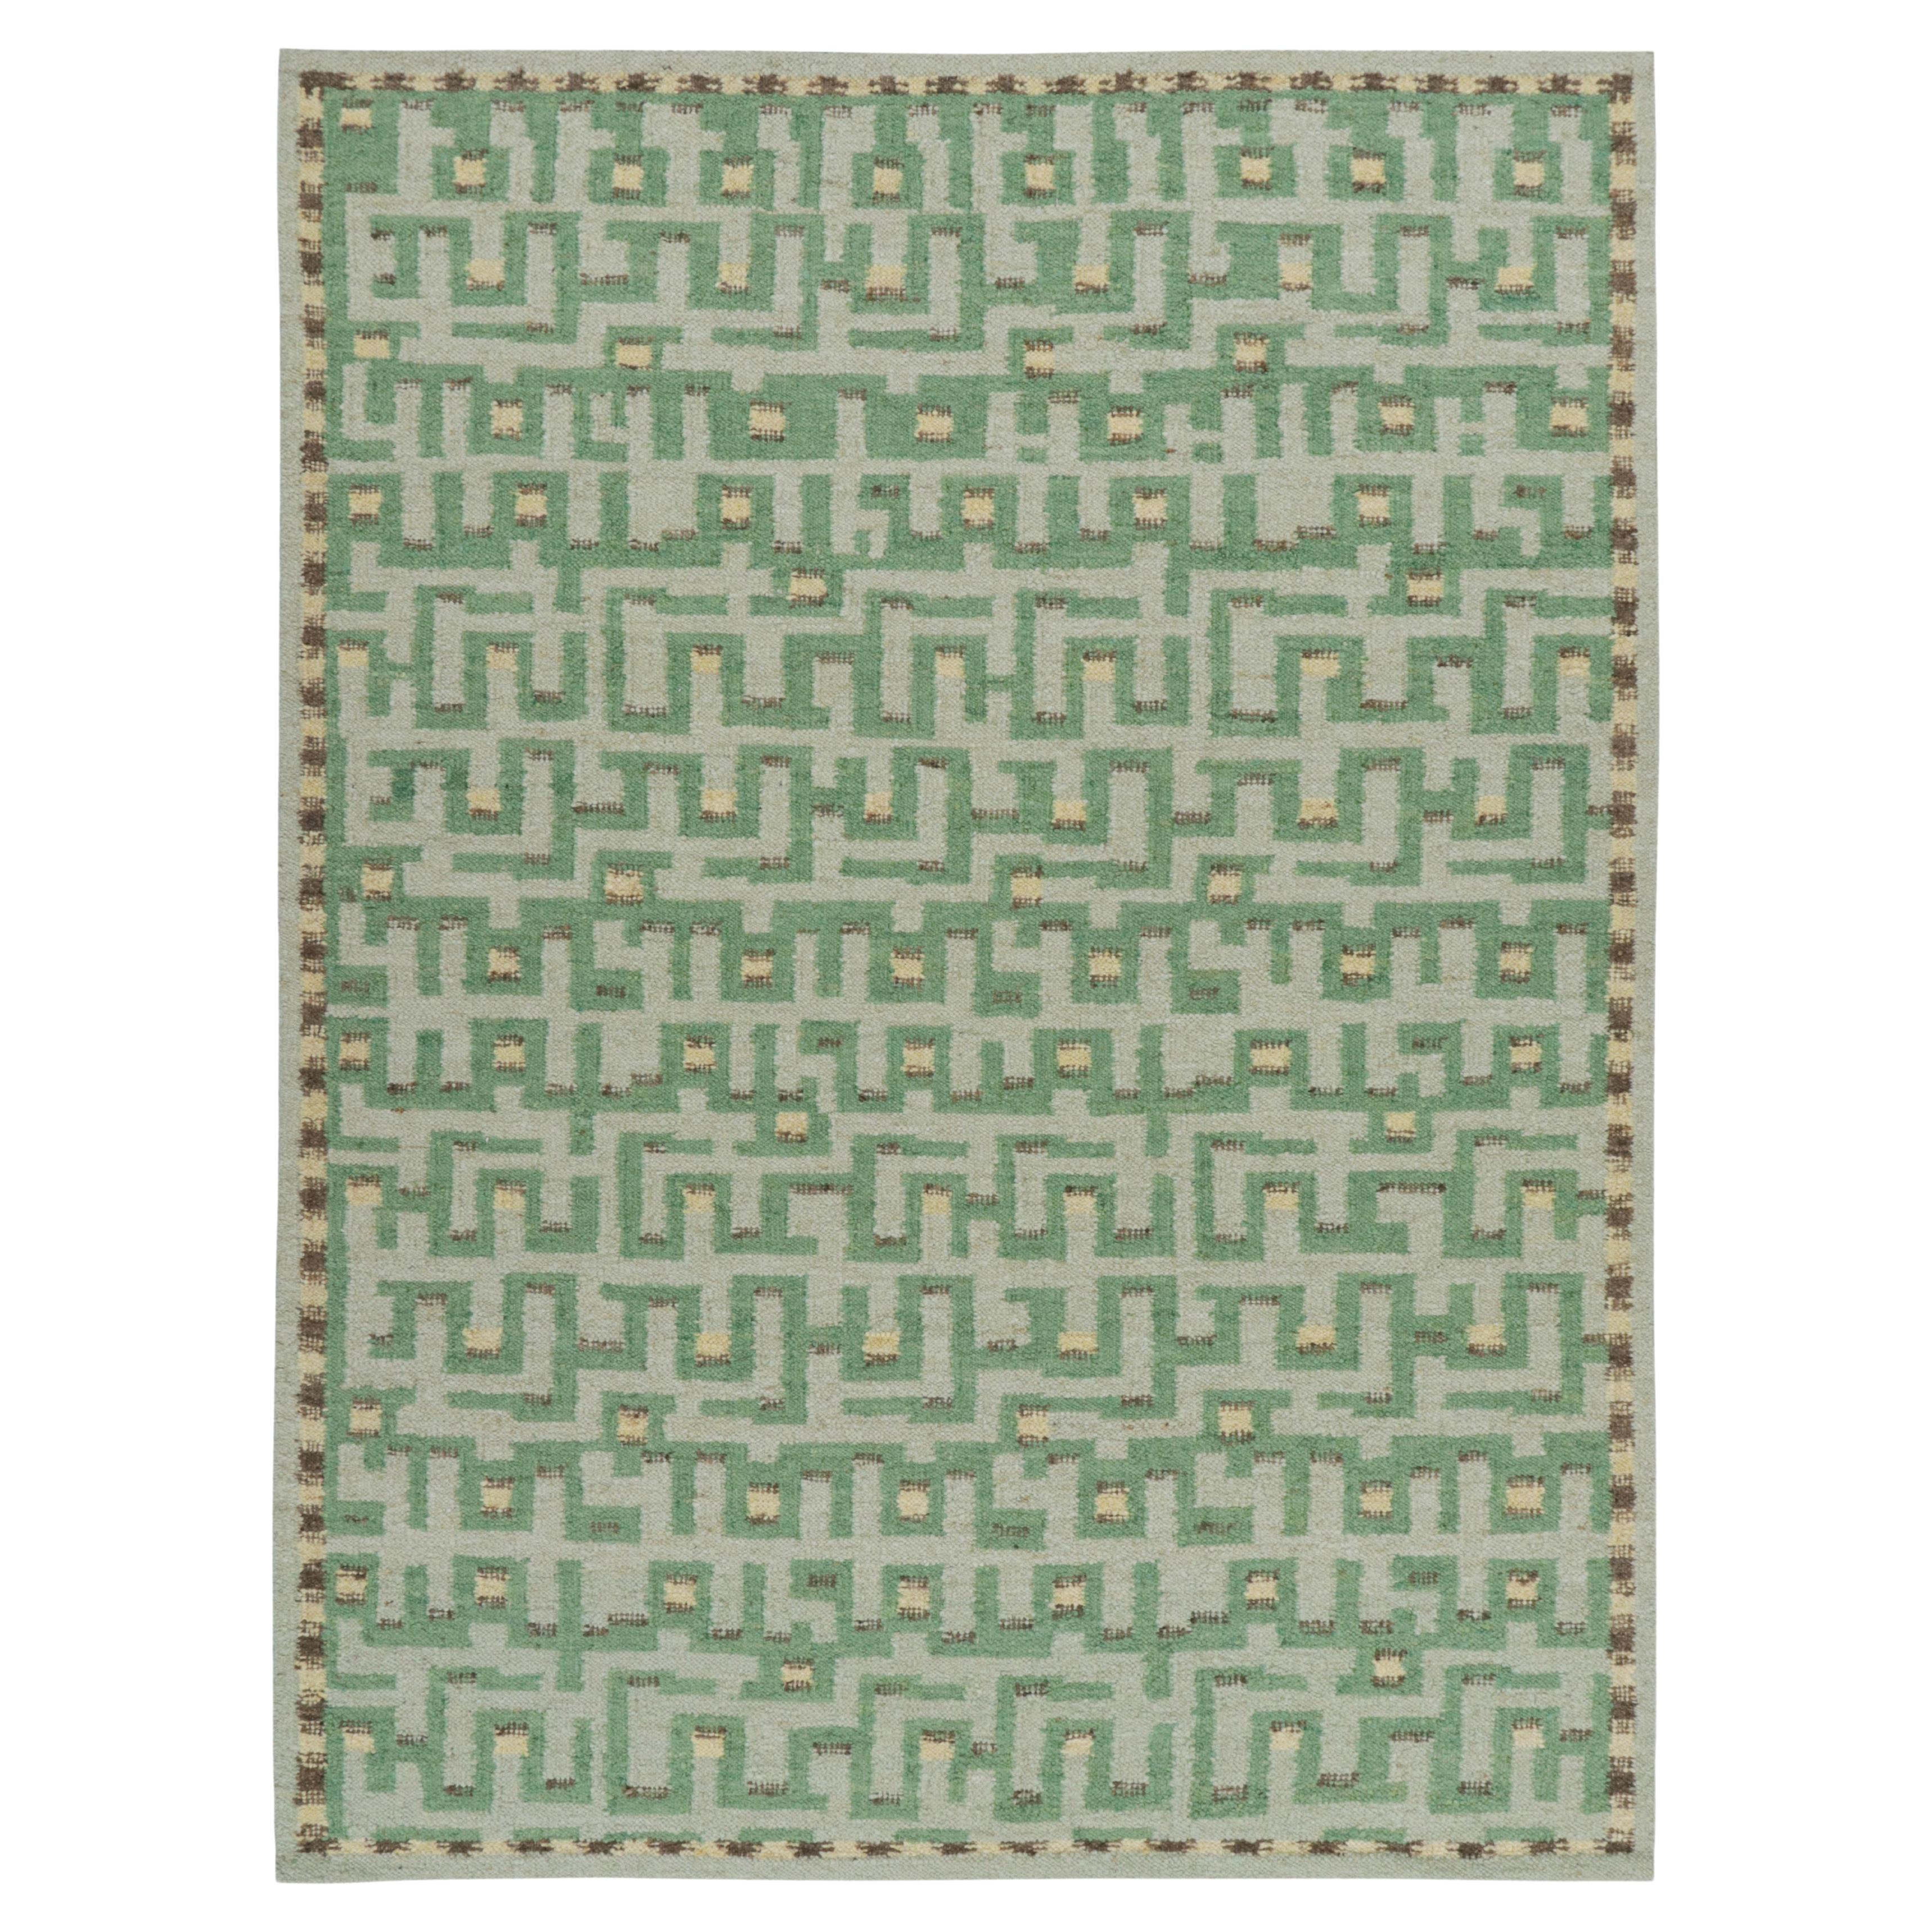 Rug & Kilim’s Scandinavian Style Rug in Green Tones with Geometric Patterns